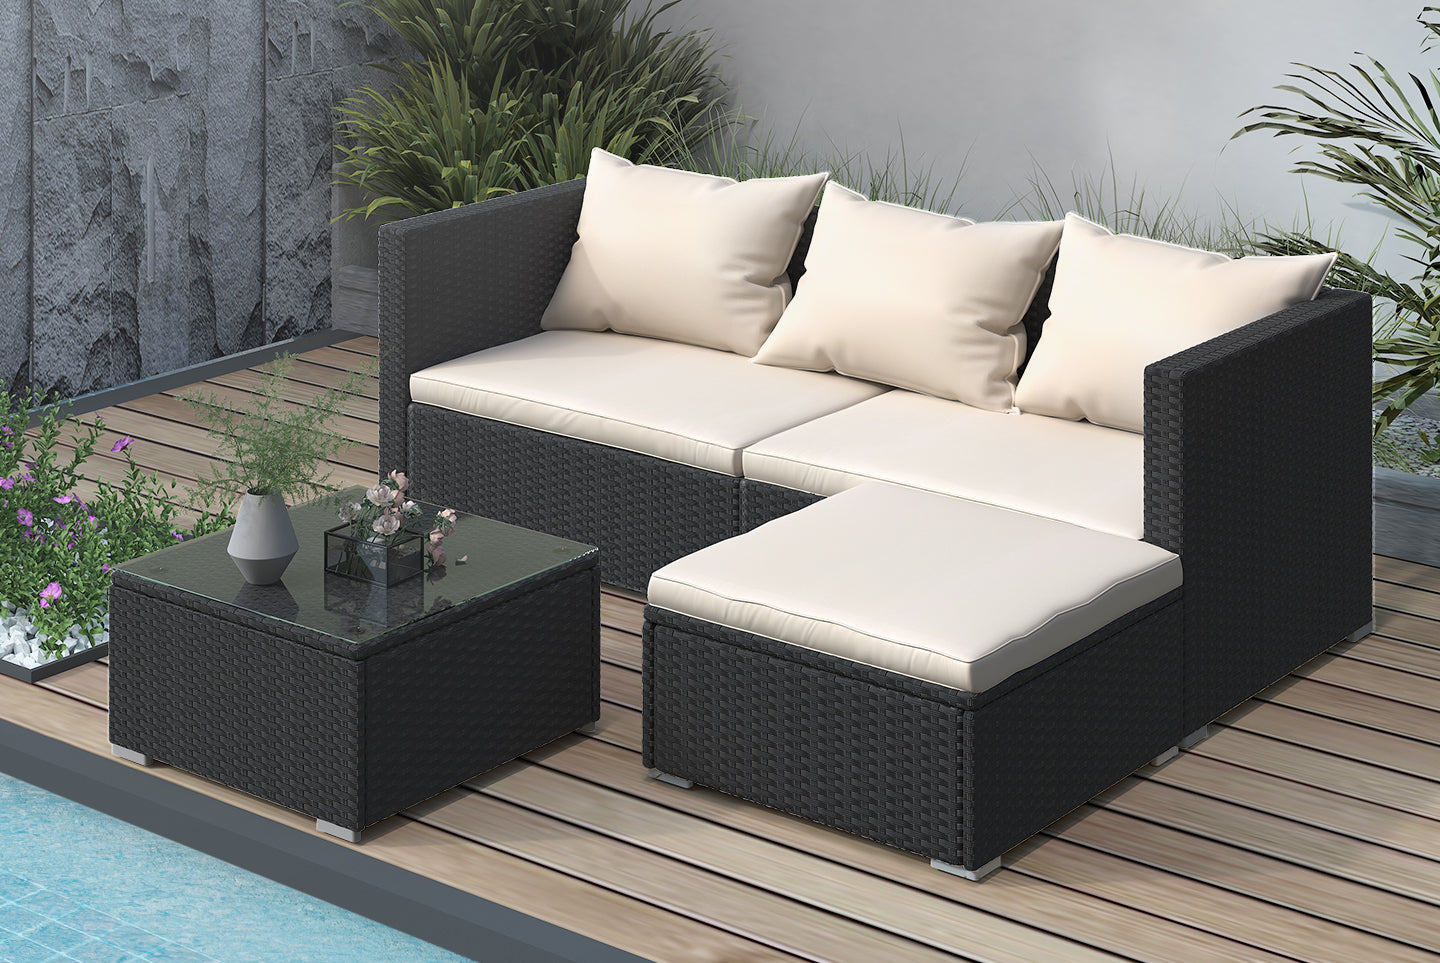 4 Pieces Patio Furniture Sets Outdoor Sofa with Washable Cushions and Glass Table